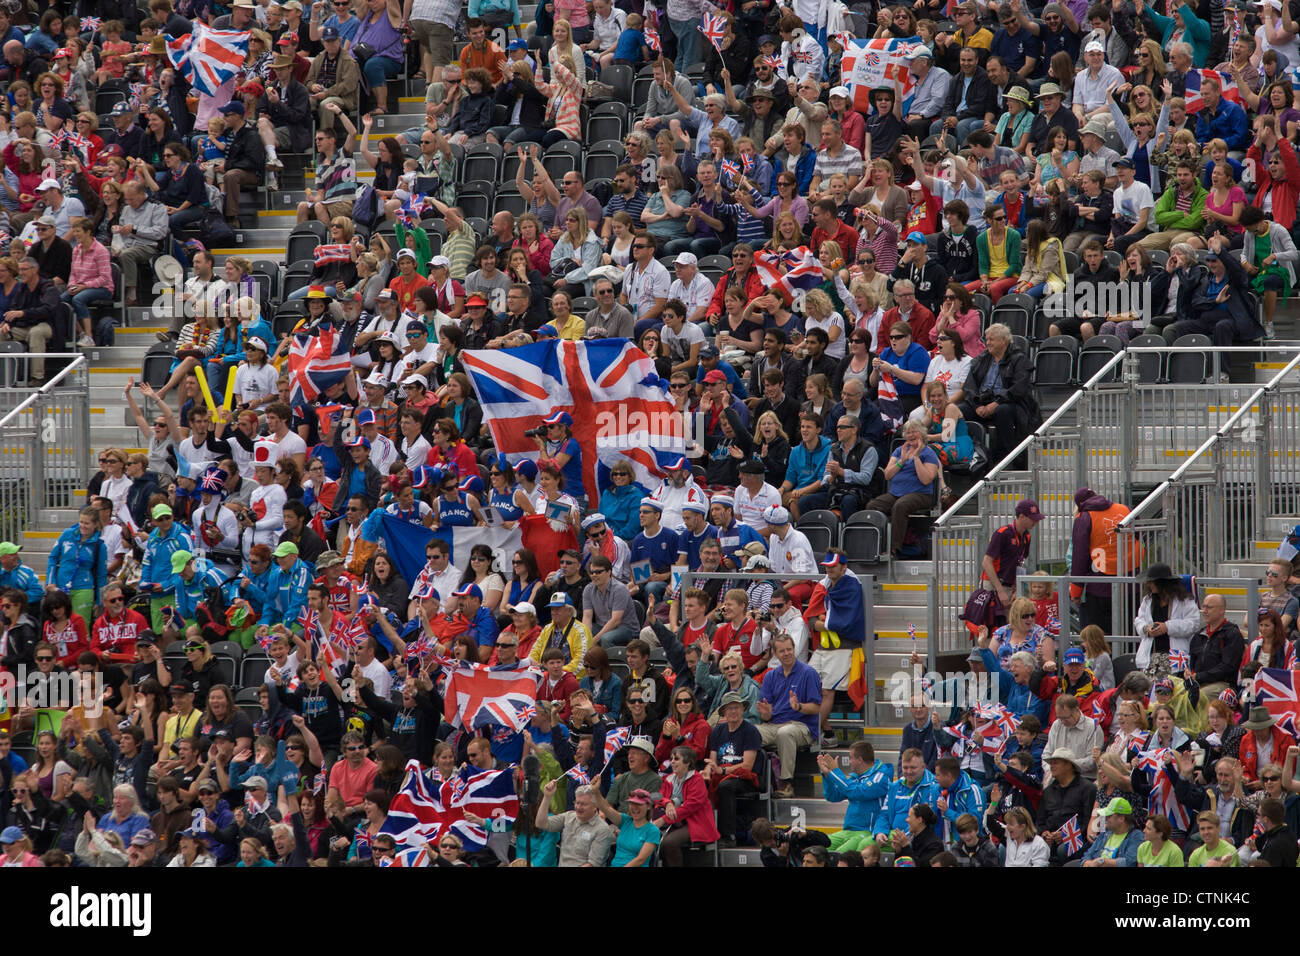 British fans hold up Union Jack flags surrounded by crowds of sports supporters seem en mass during the canoe slalom heats at the Lee Valley White Water Centre, north east London, on day 3 of the London 2012 Olympic Games. Stock Photo